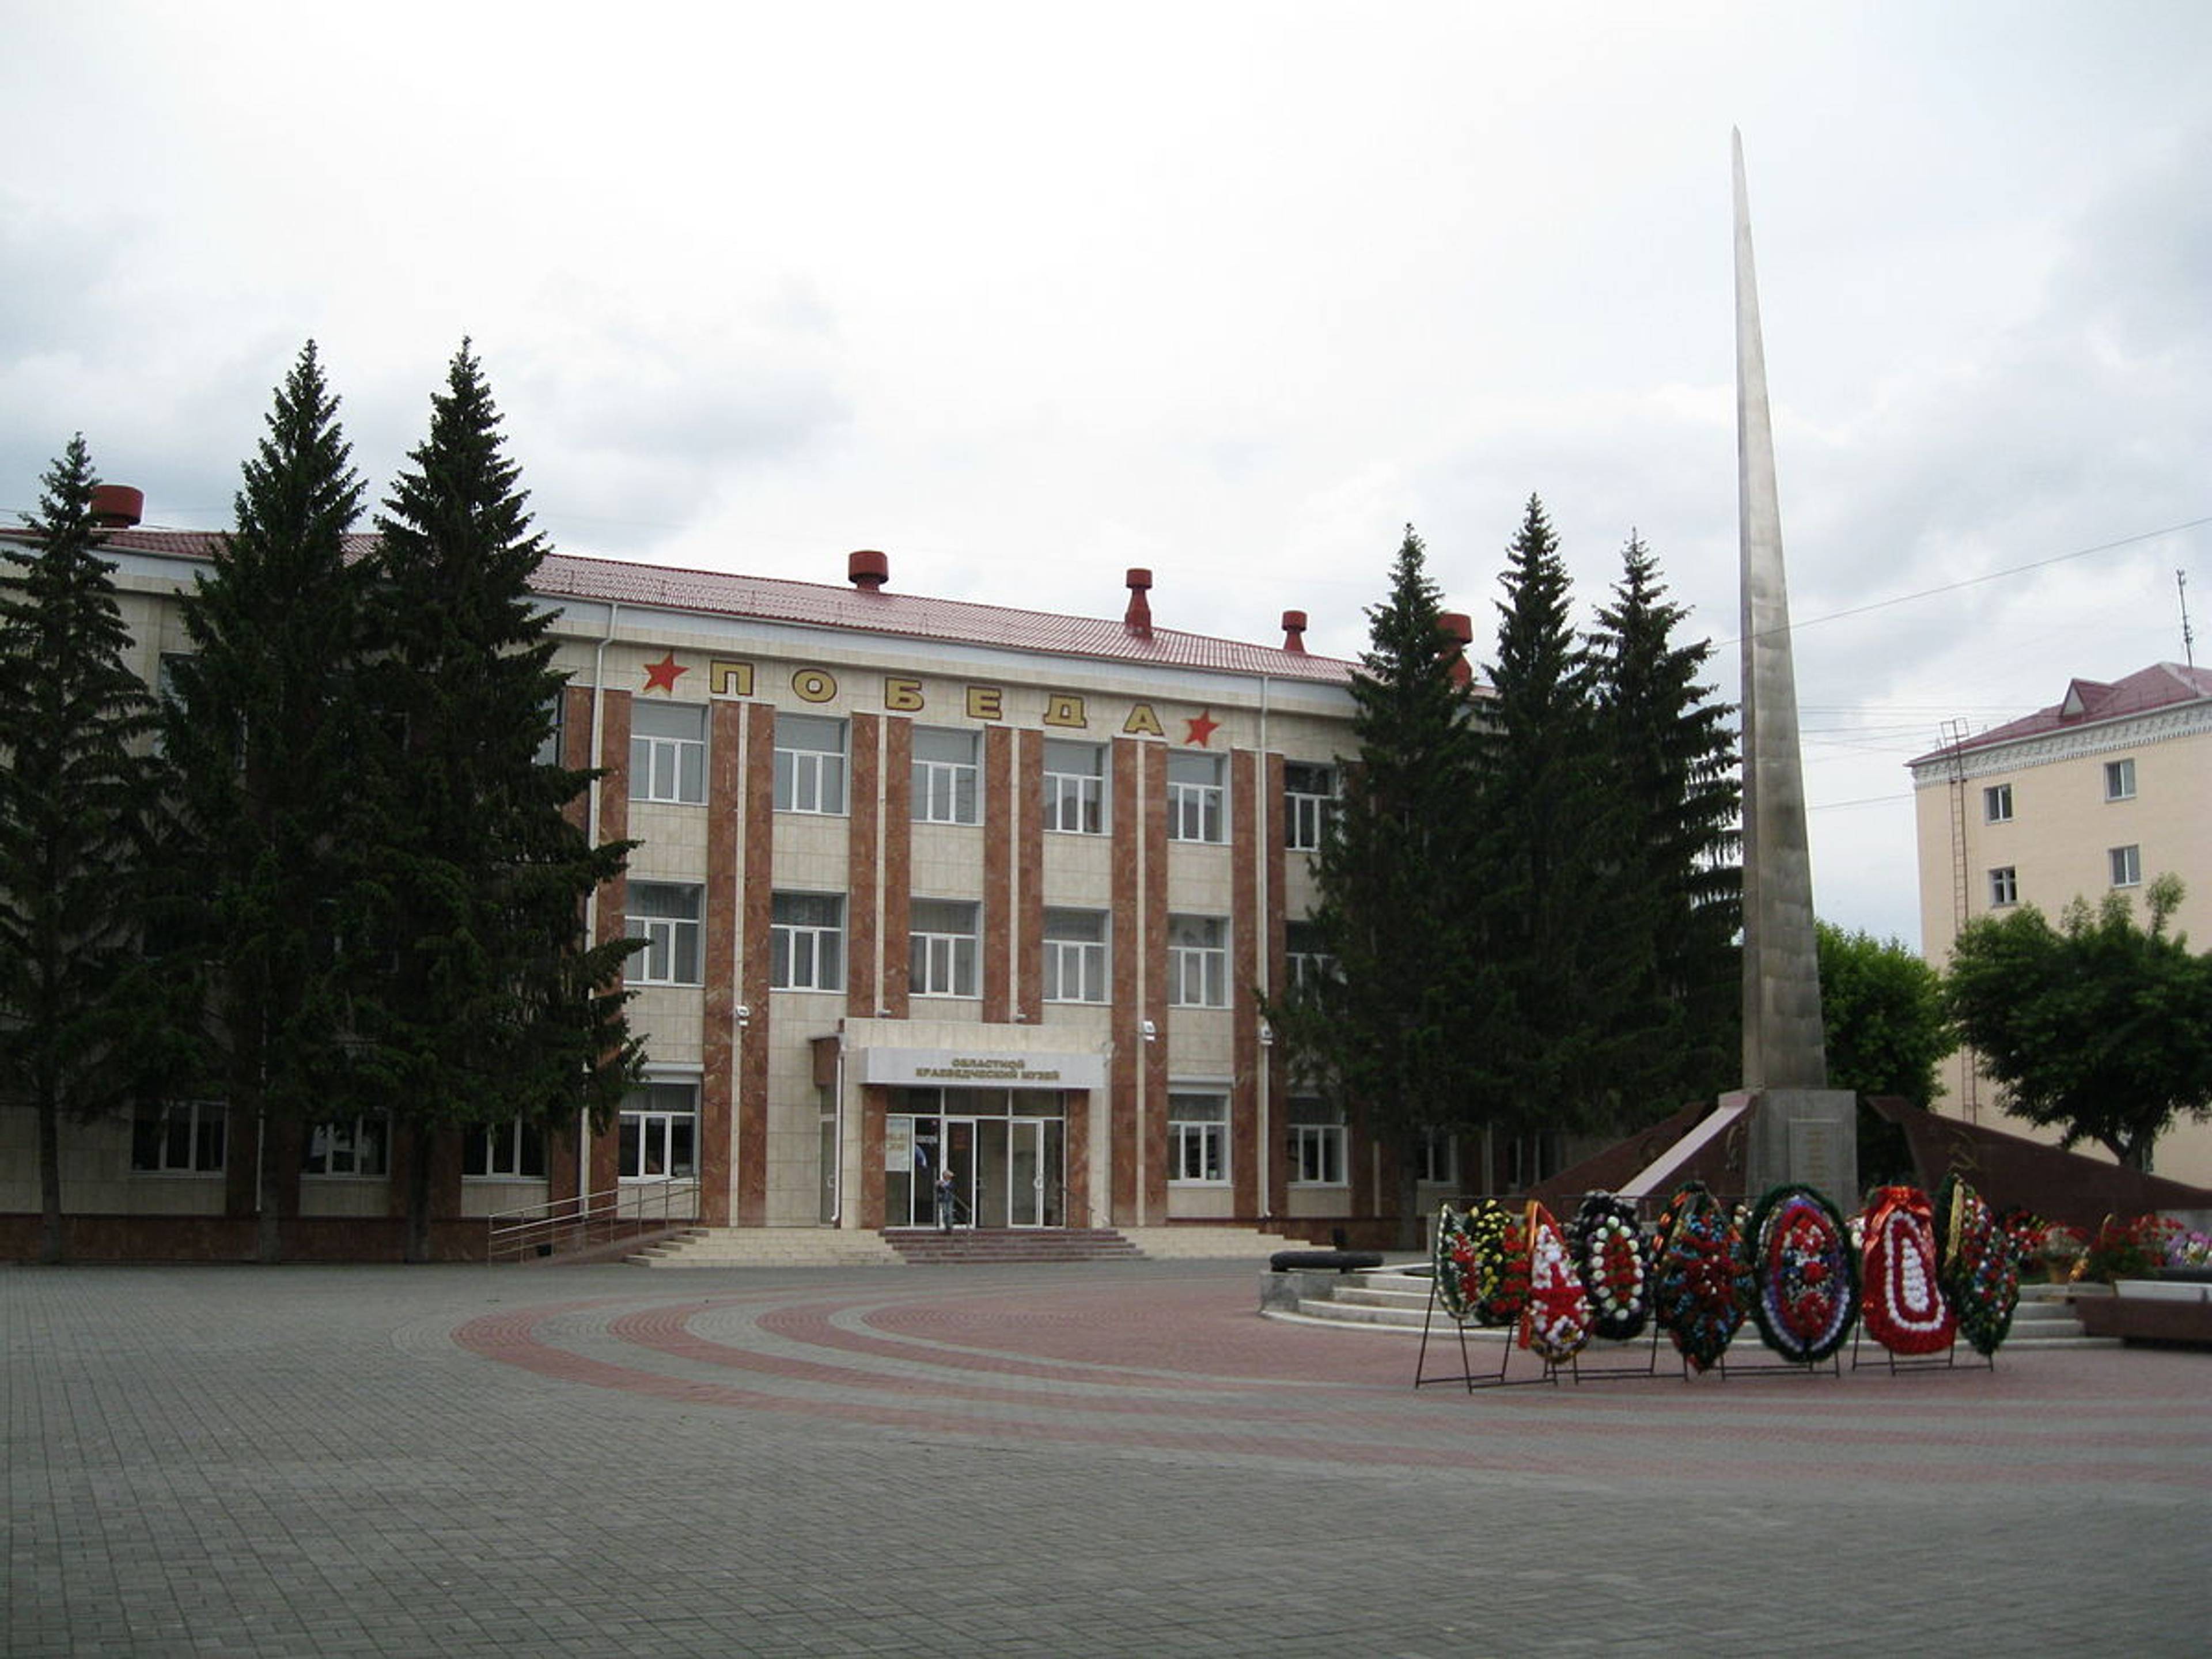 Local History Museum